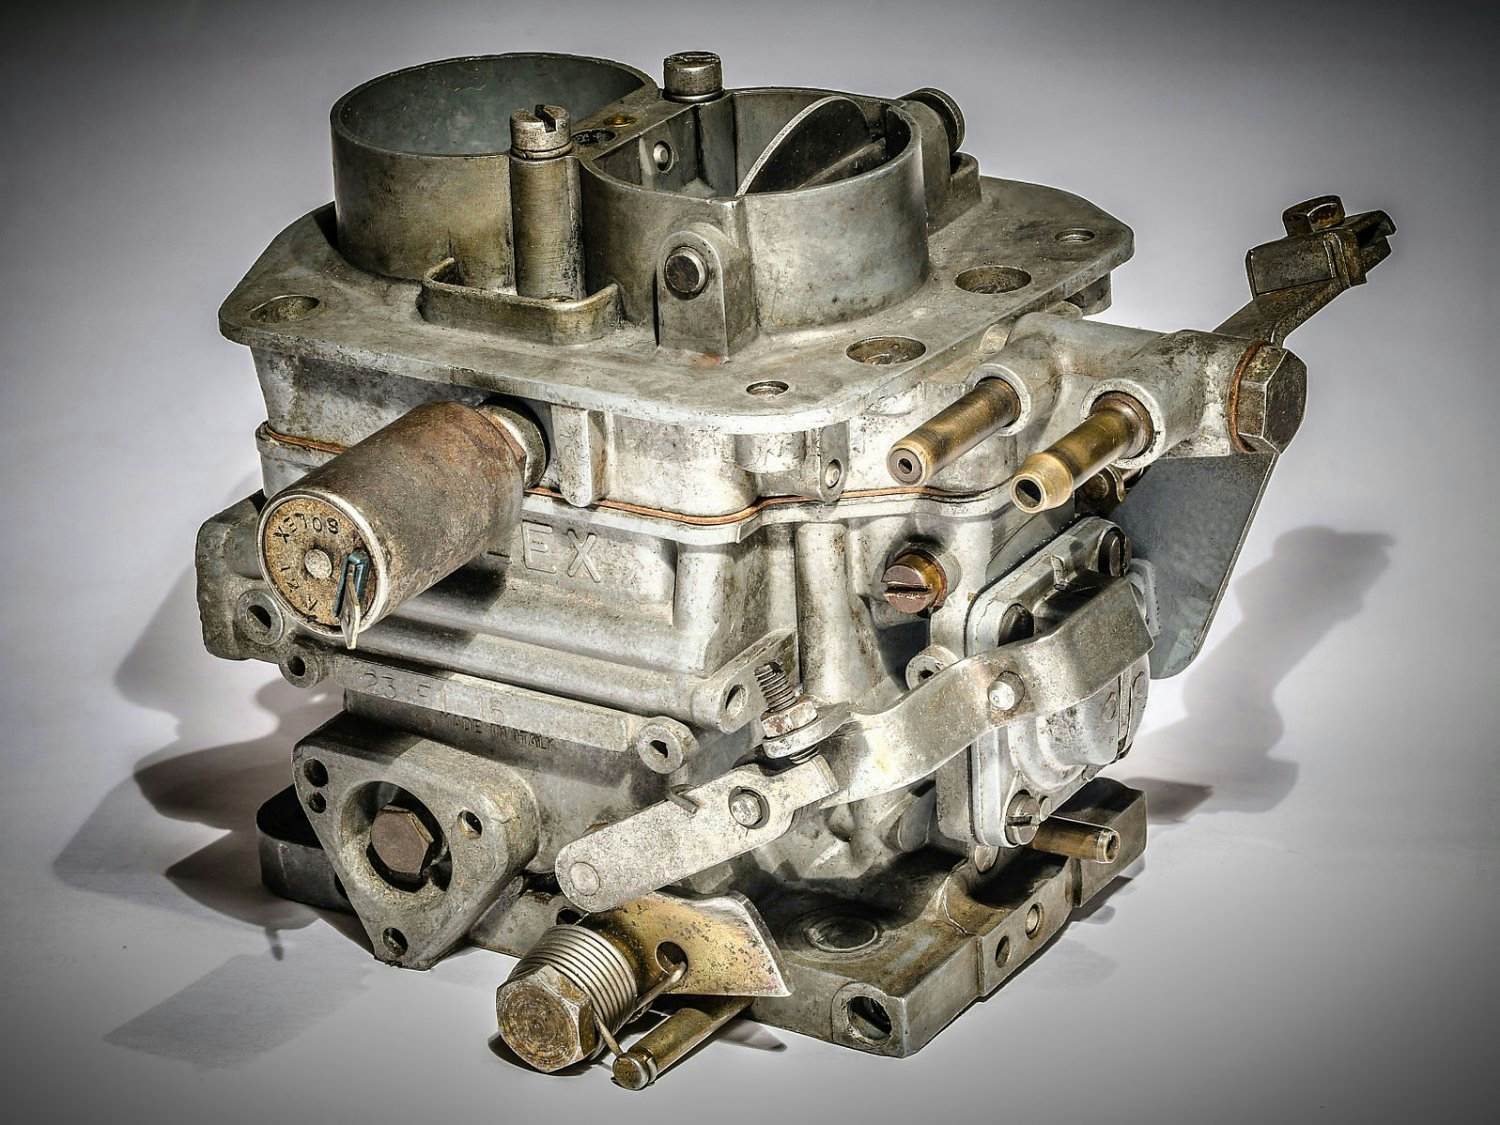 Carburetor: How does this device work?